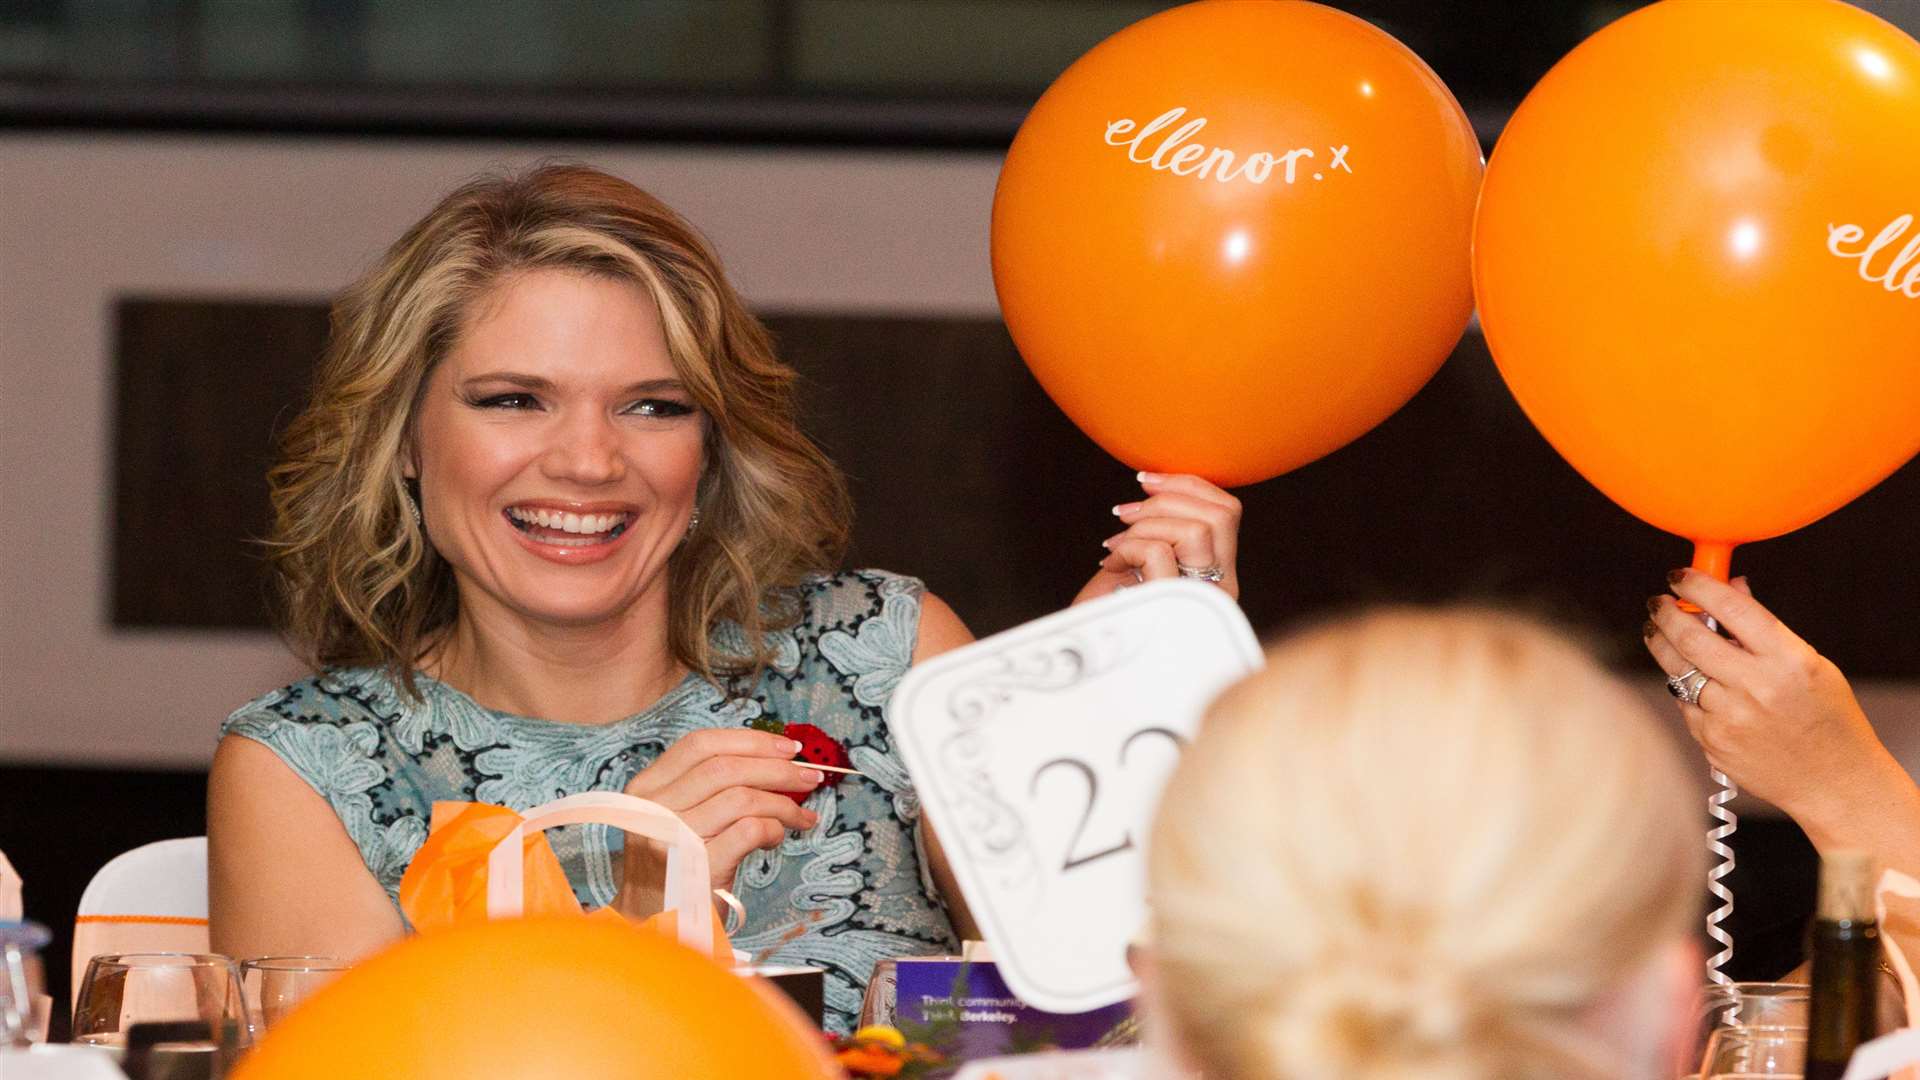 Charlotte Hawkins from Good Morning Britain